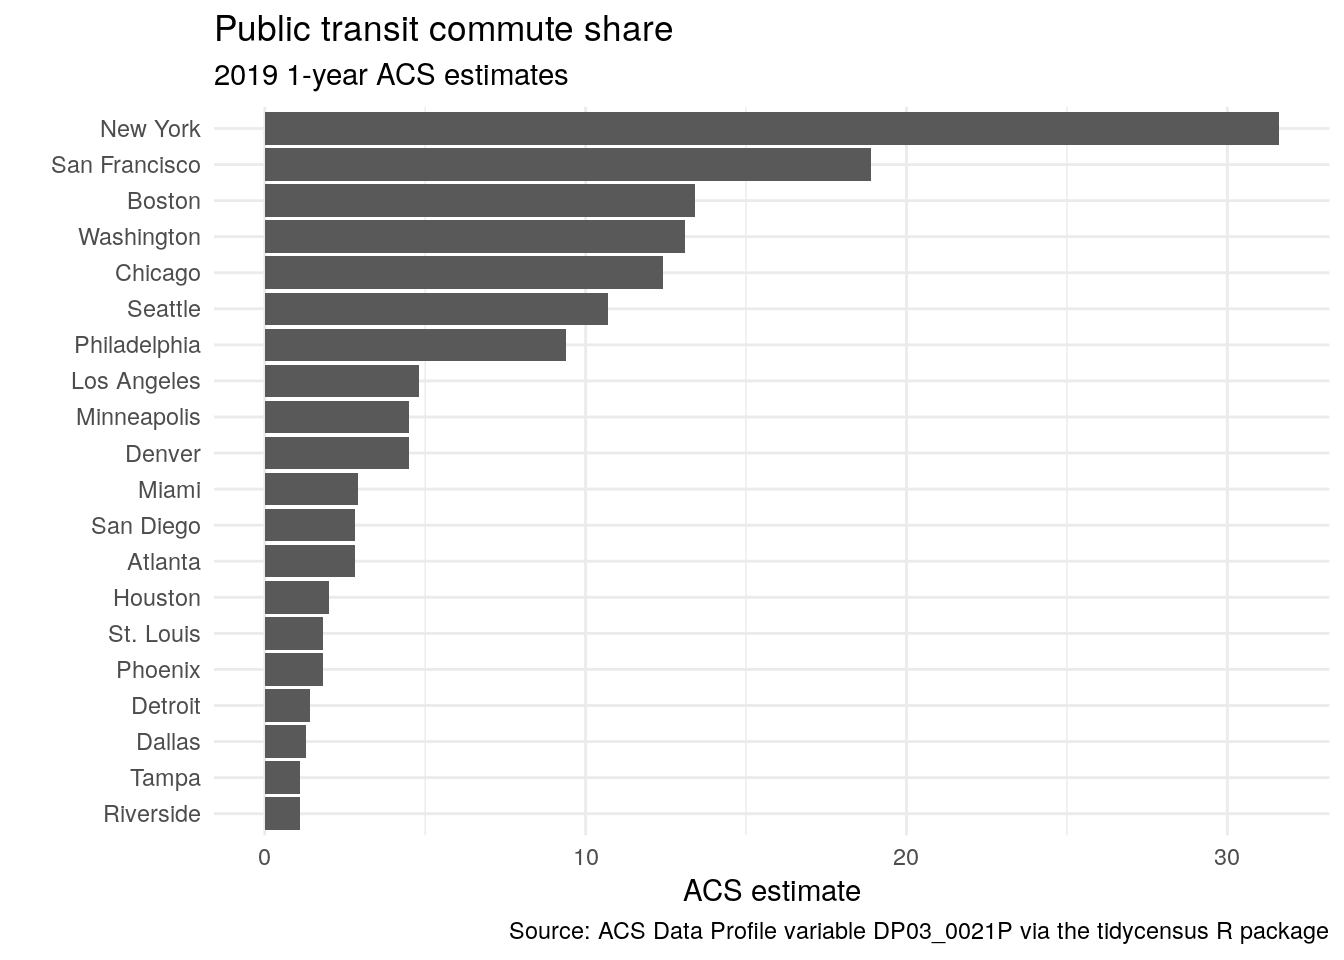 A cleaned-up bar chart with ggplot2